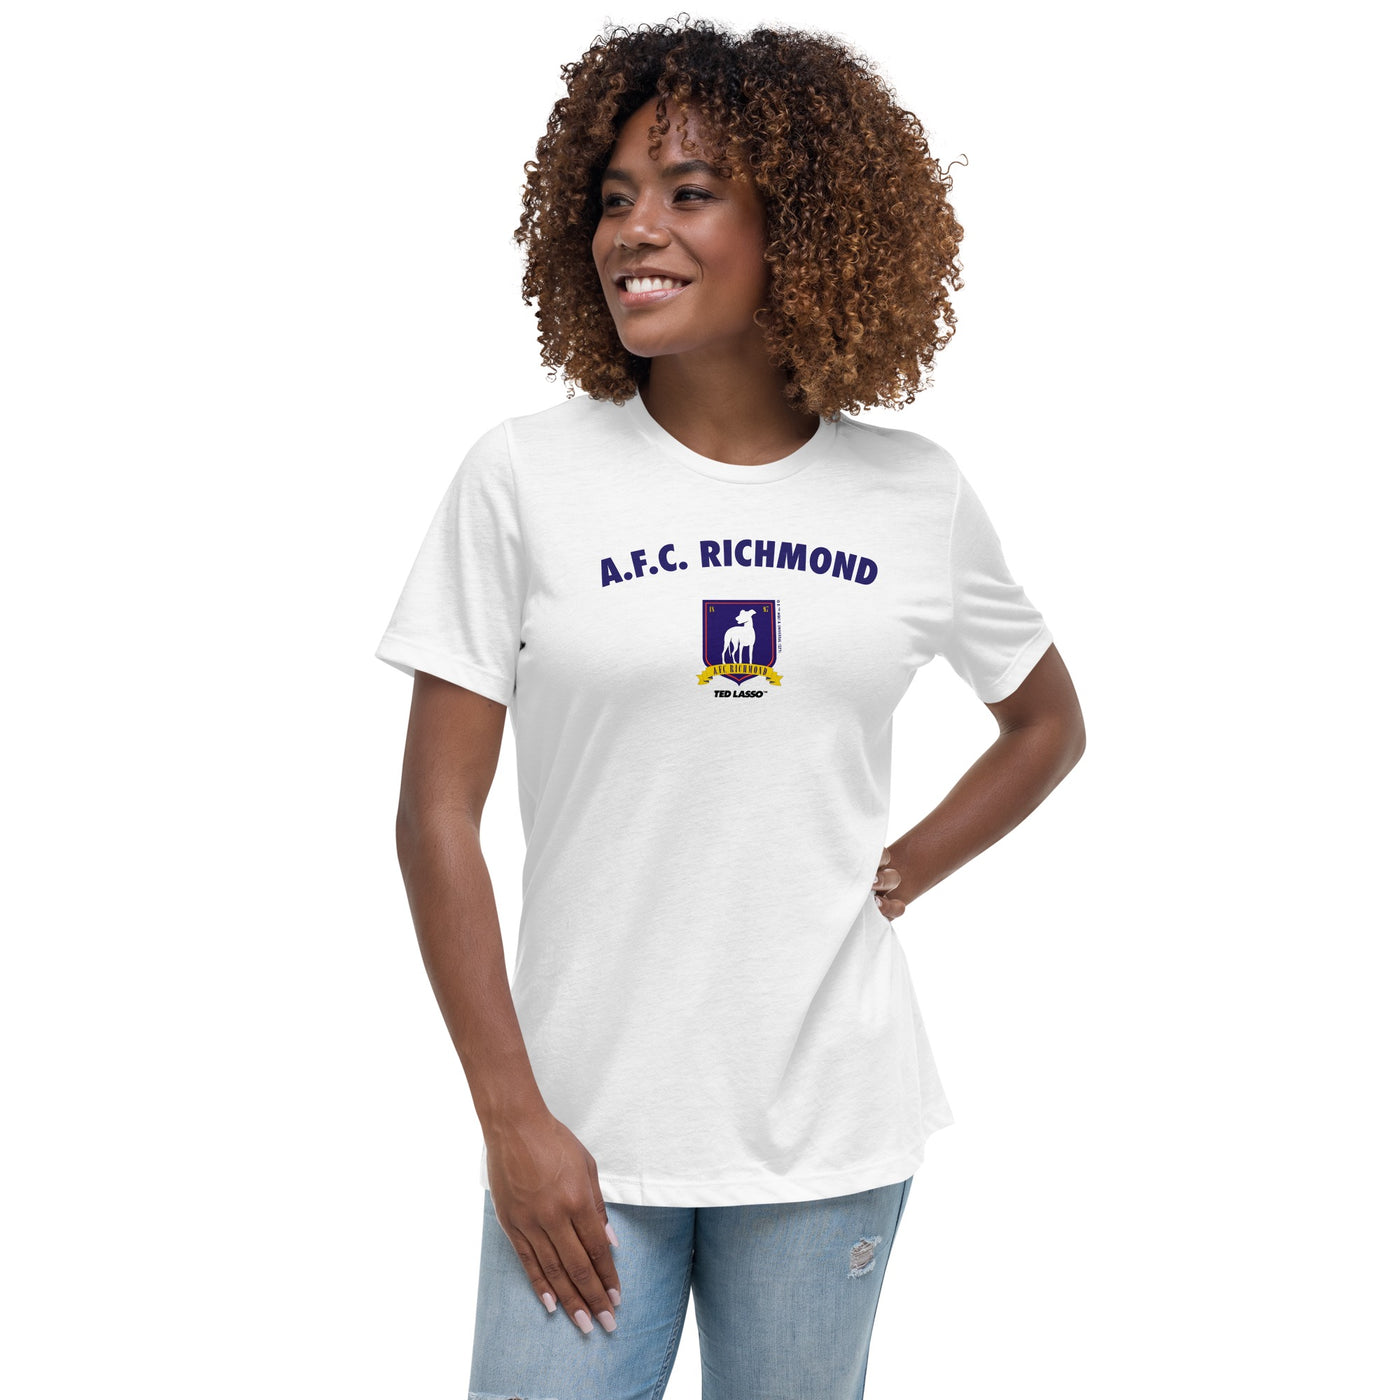 Ted Lasso A.F.C. Richmond Arch and Crest Women's T-Shirt